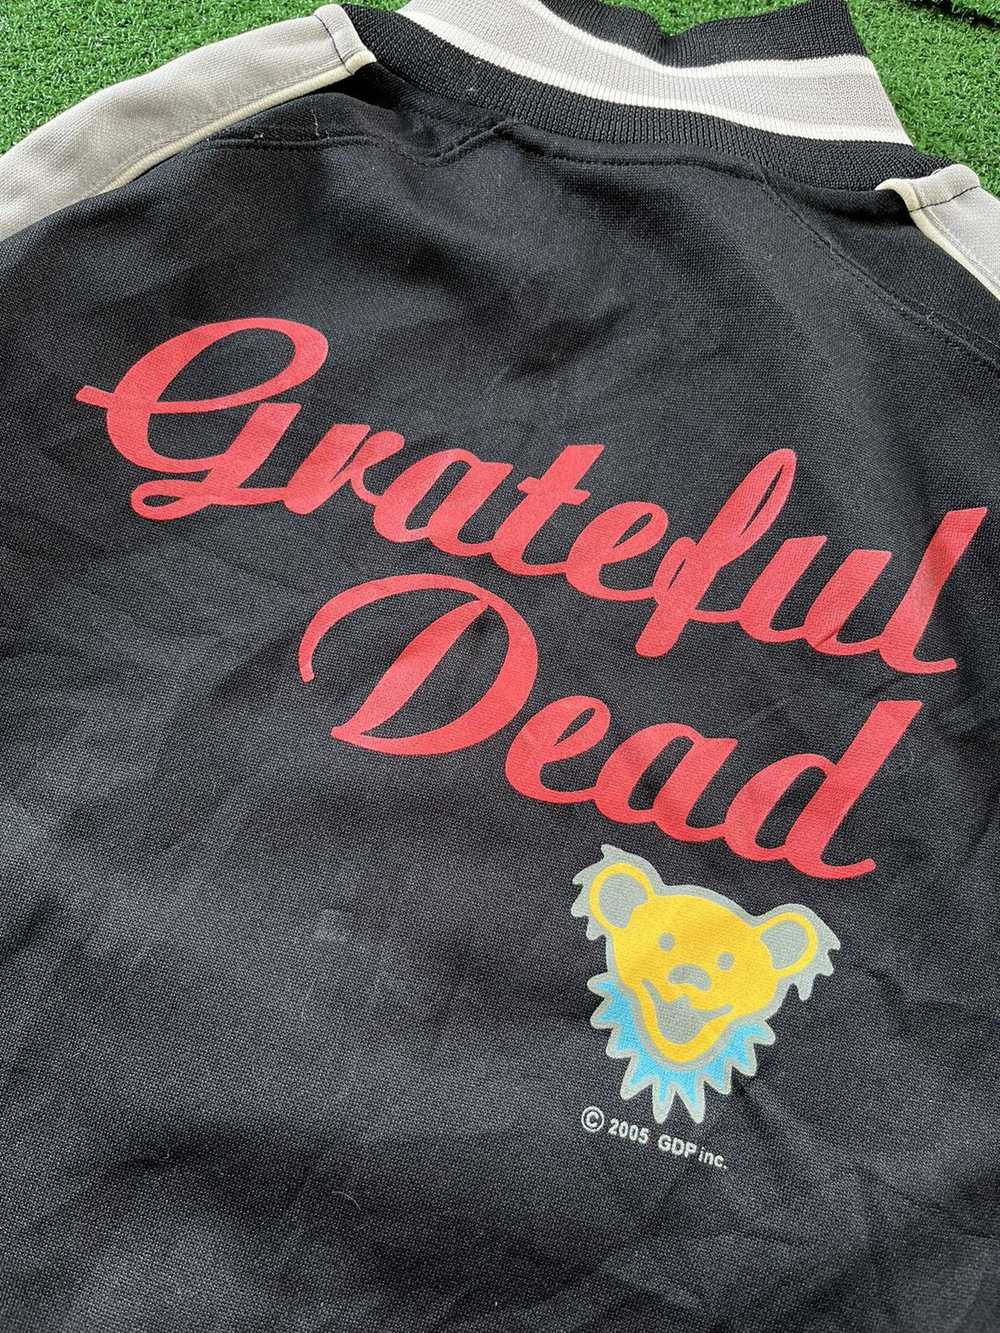 Band Tees × Grateful Dead × The Greatful Dead The… - image 10